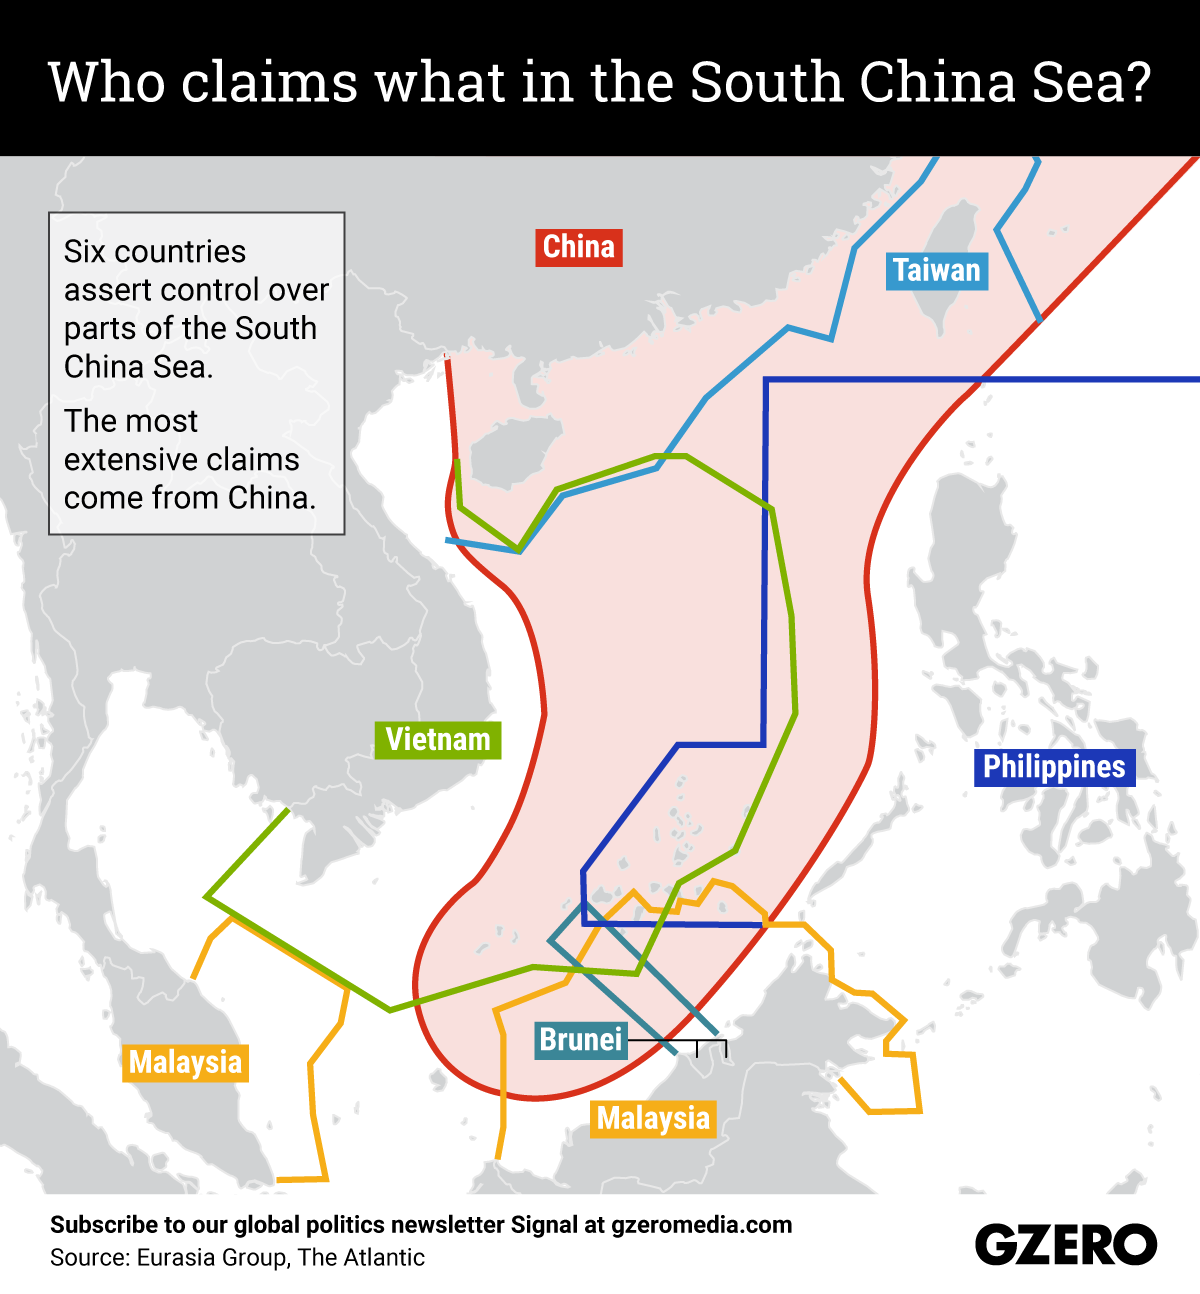 The Graphic Truth: Who claims what in the South China Sea?